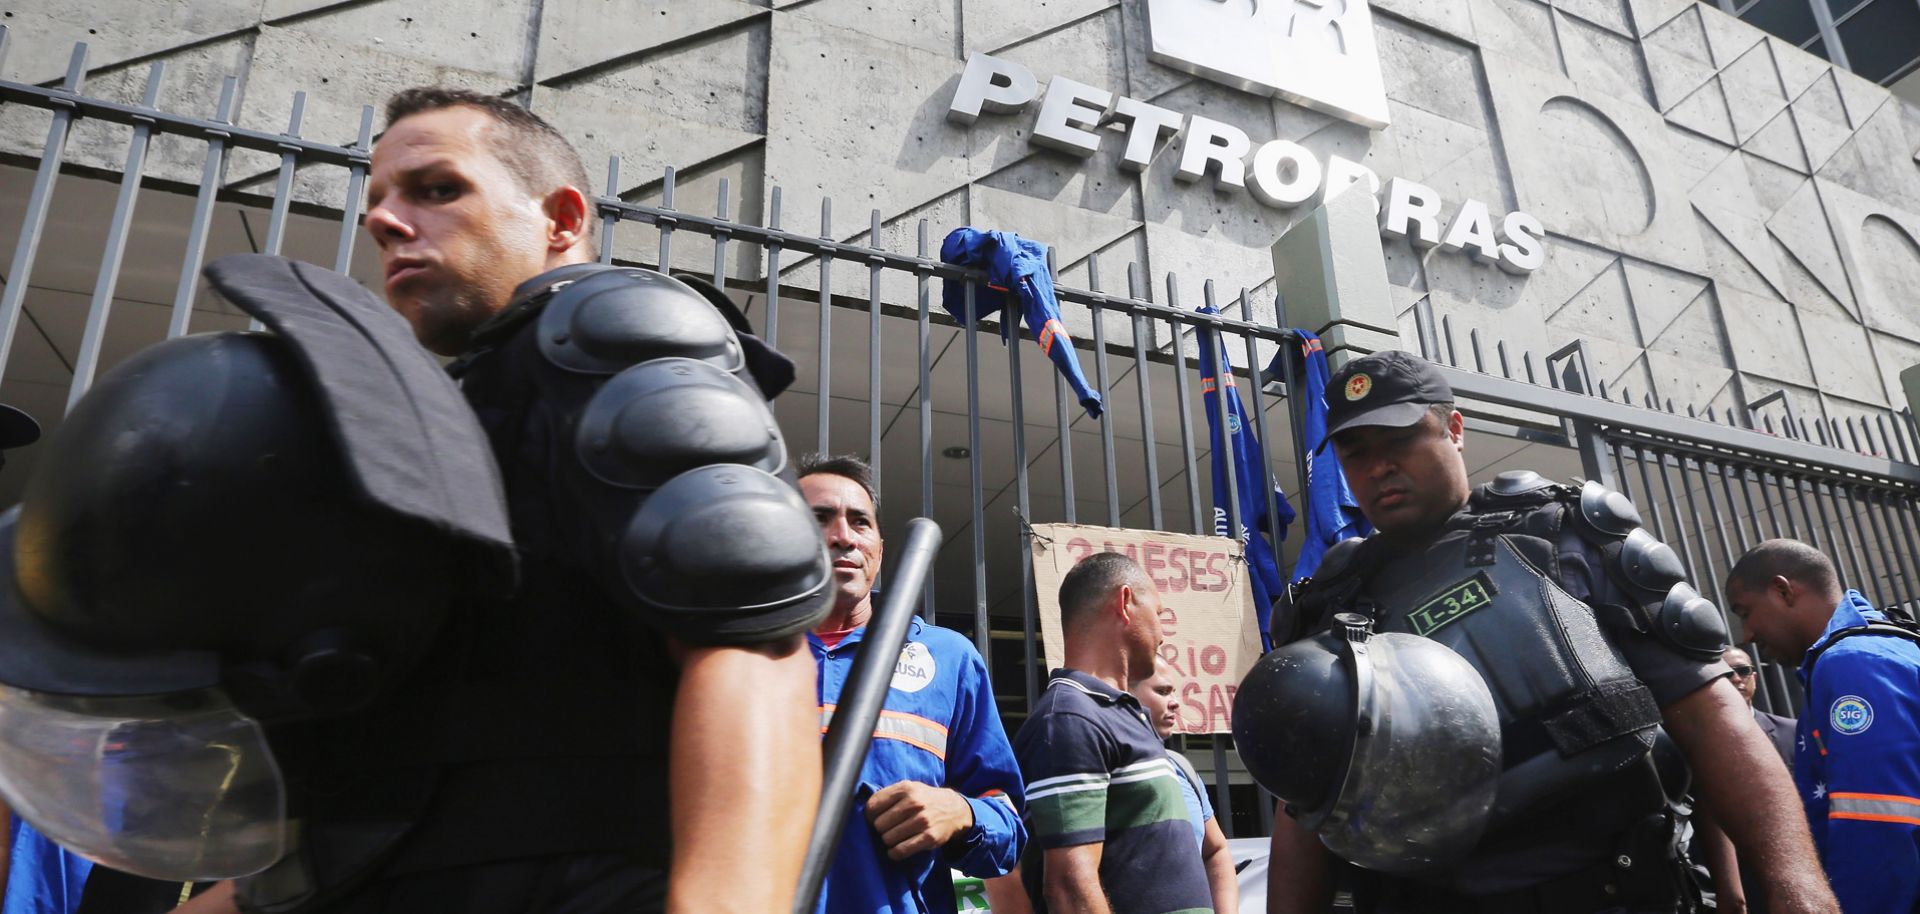 Military police watch as workers from a company sub-contracted by Brazil's government-run oil company Petroleo Brasileiro gather at a protest at the company's headquarters on Feb. 4.